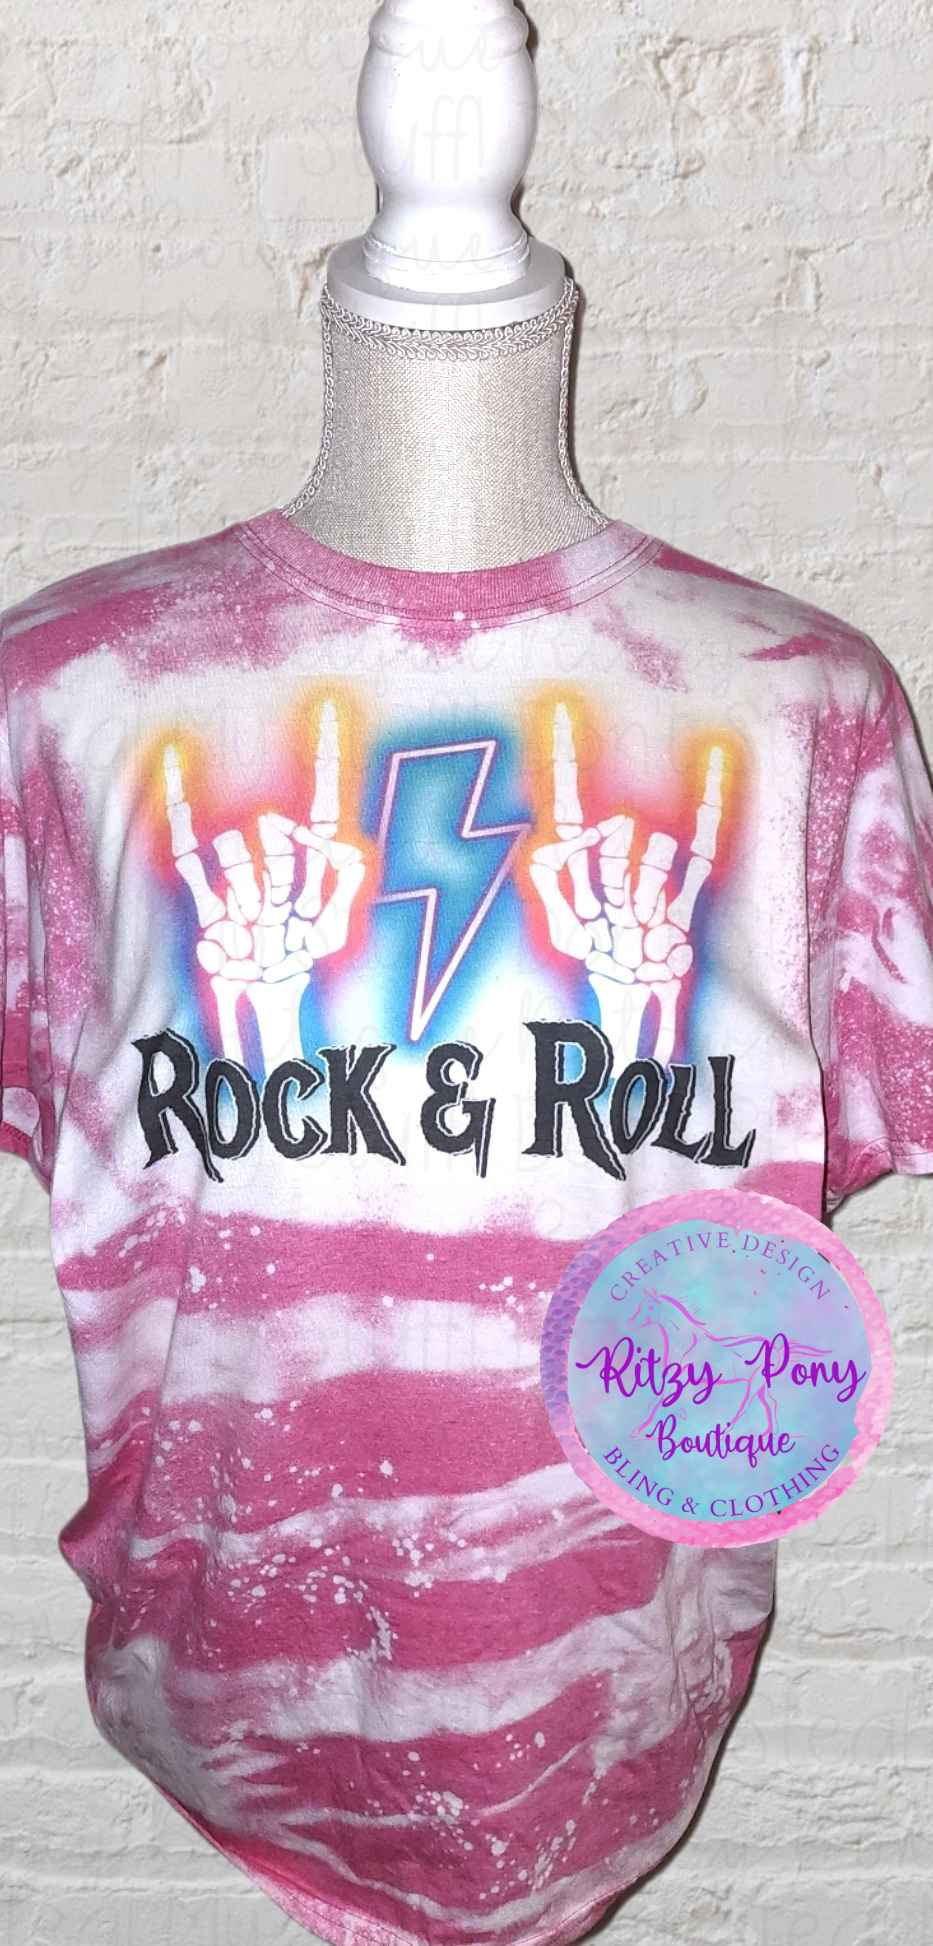 Rock & Roll Neon T-shirt - The Ritzy Pony Boutique